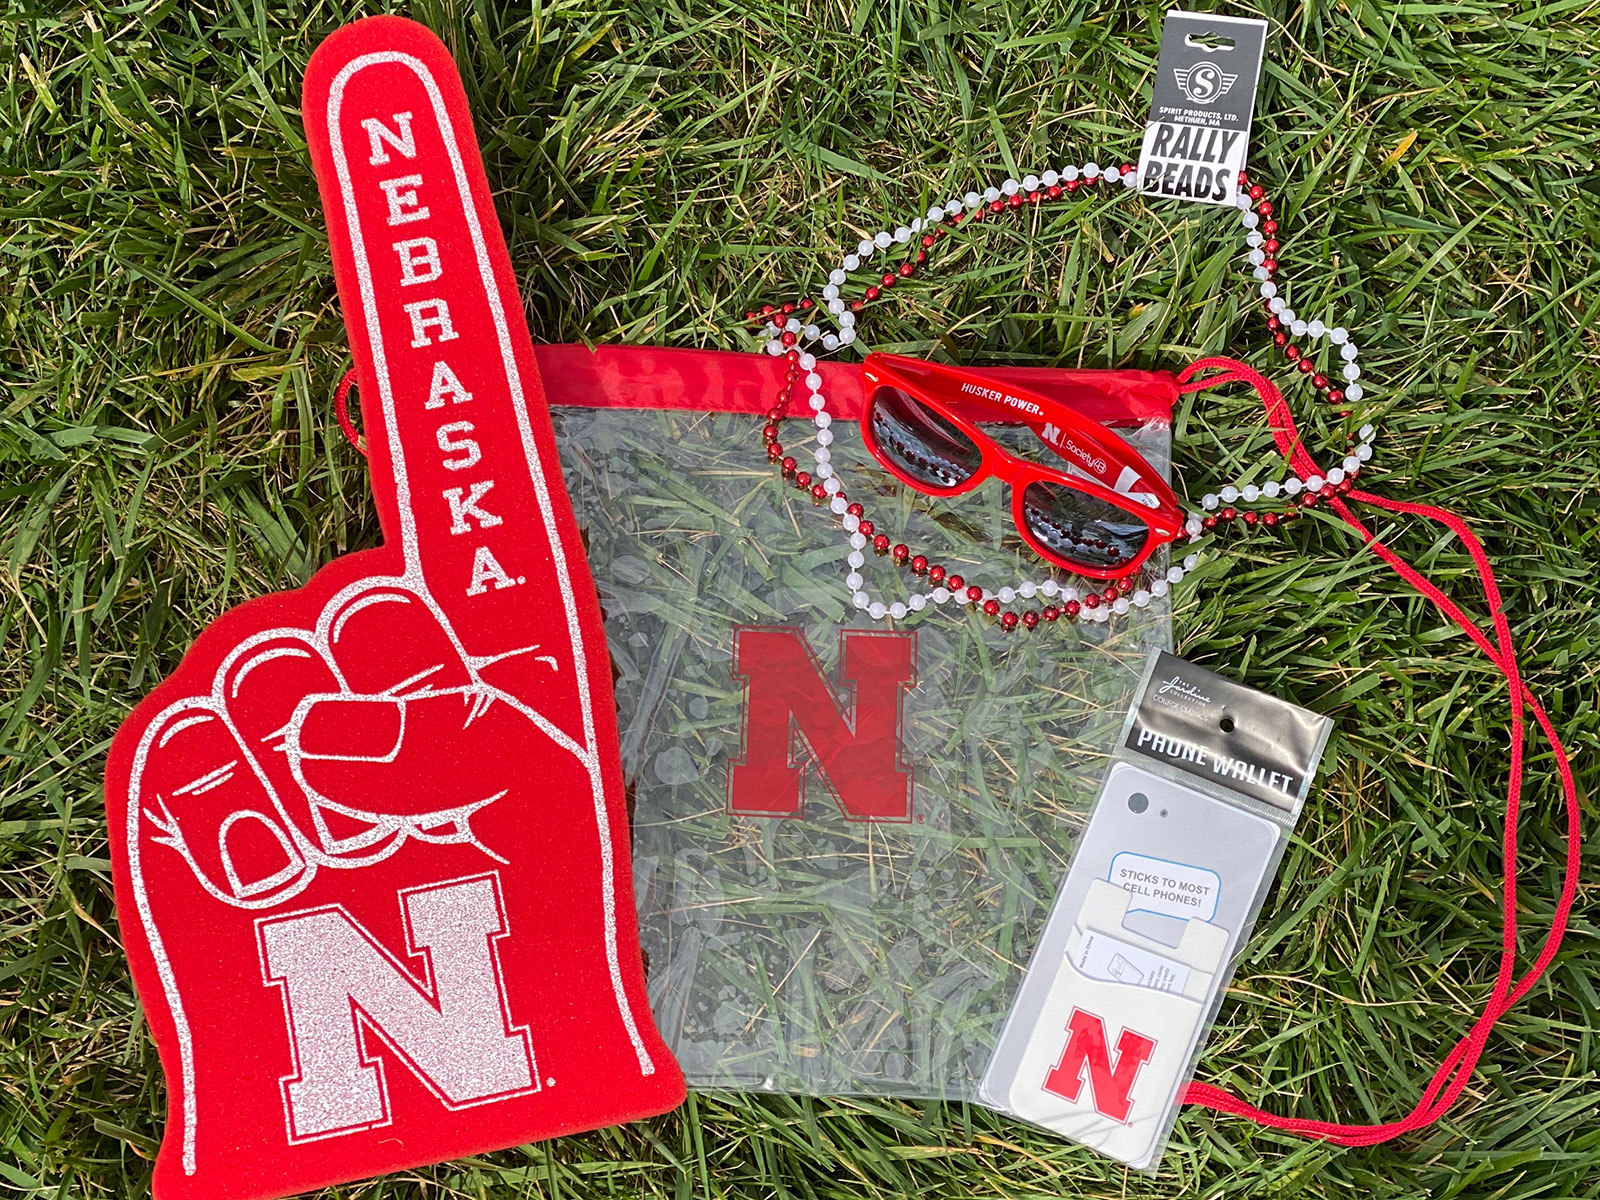 The Student Tailgate area is hosted in Meier Commons, just north of the Nebraska Union.